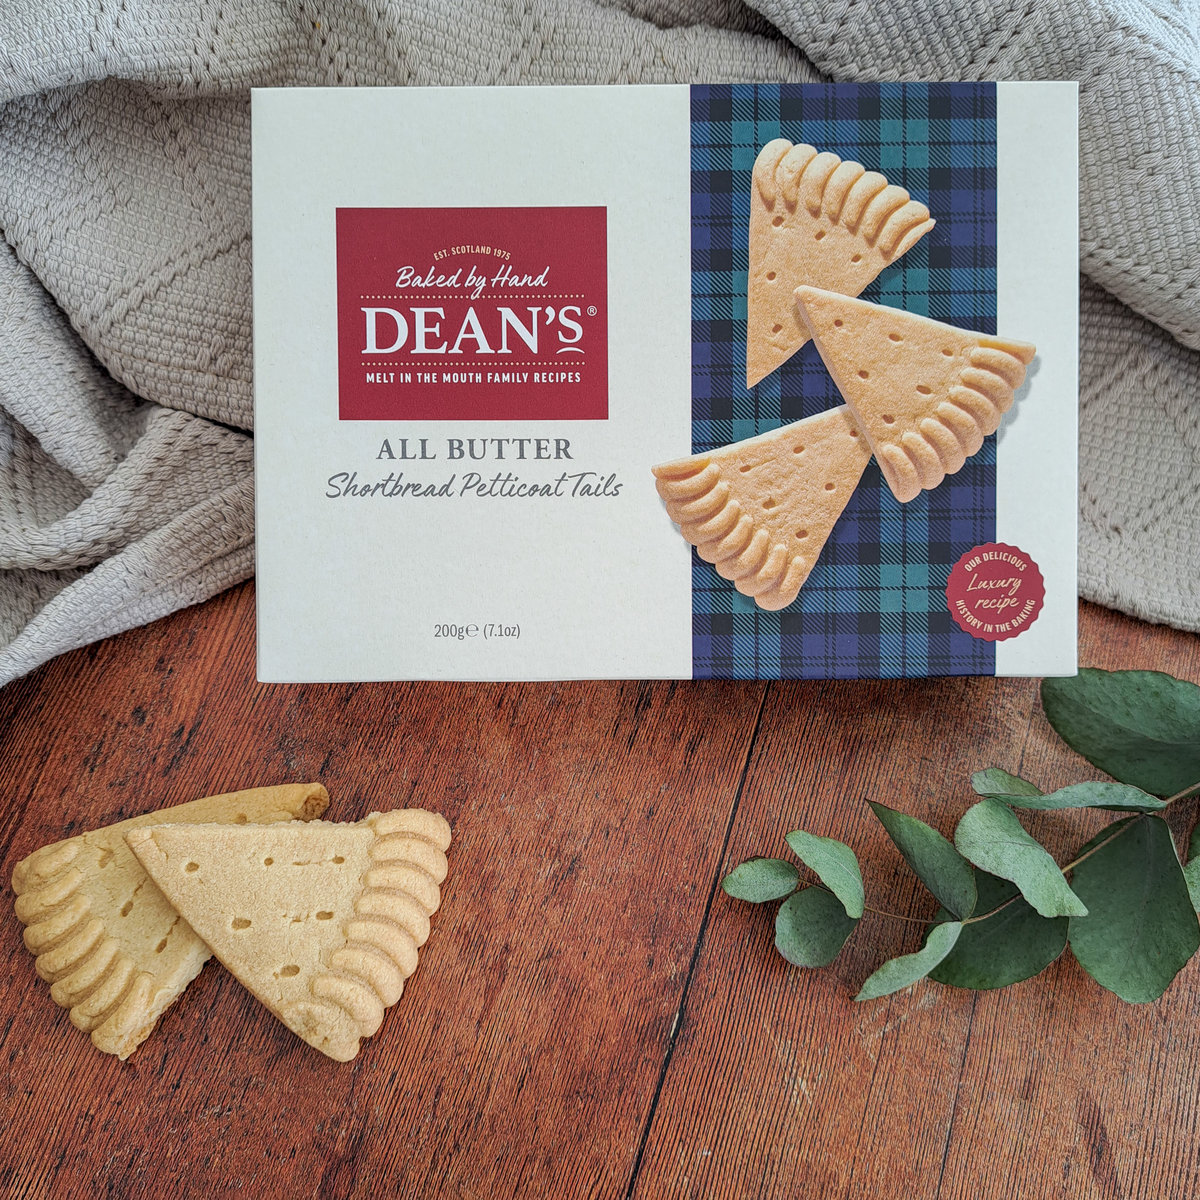 All Butter Shortbread Petticoat Tails 200g